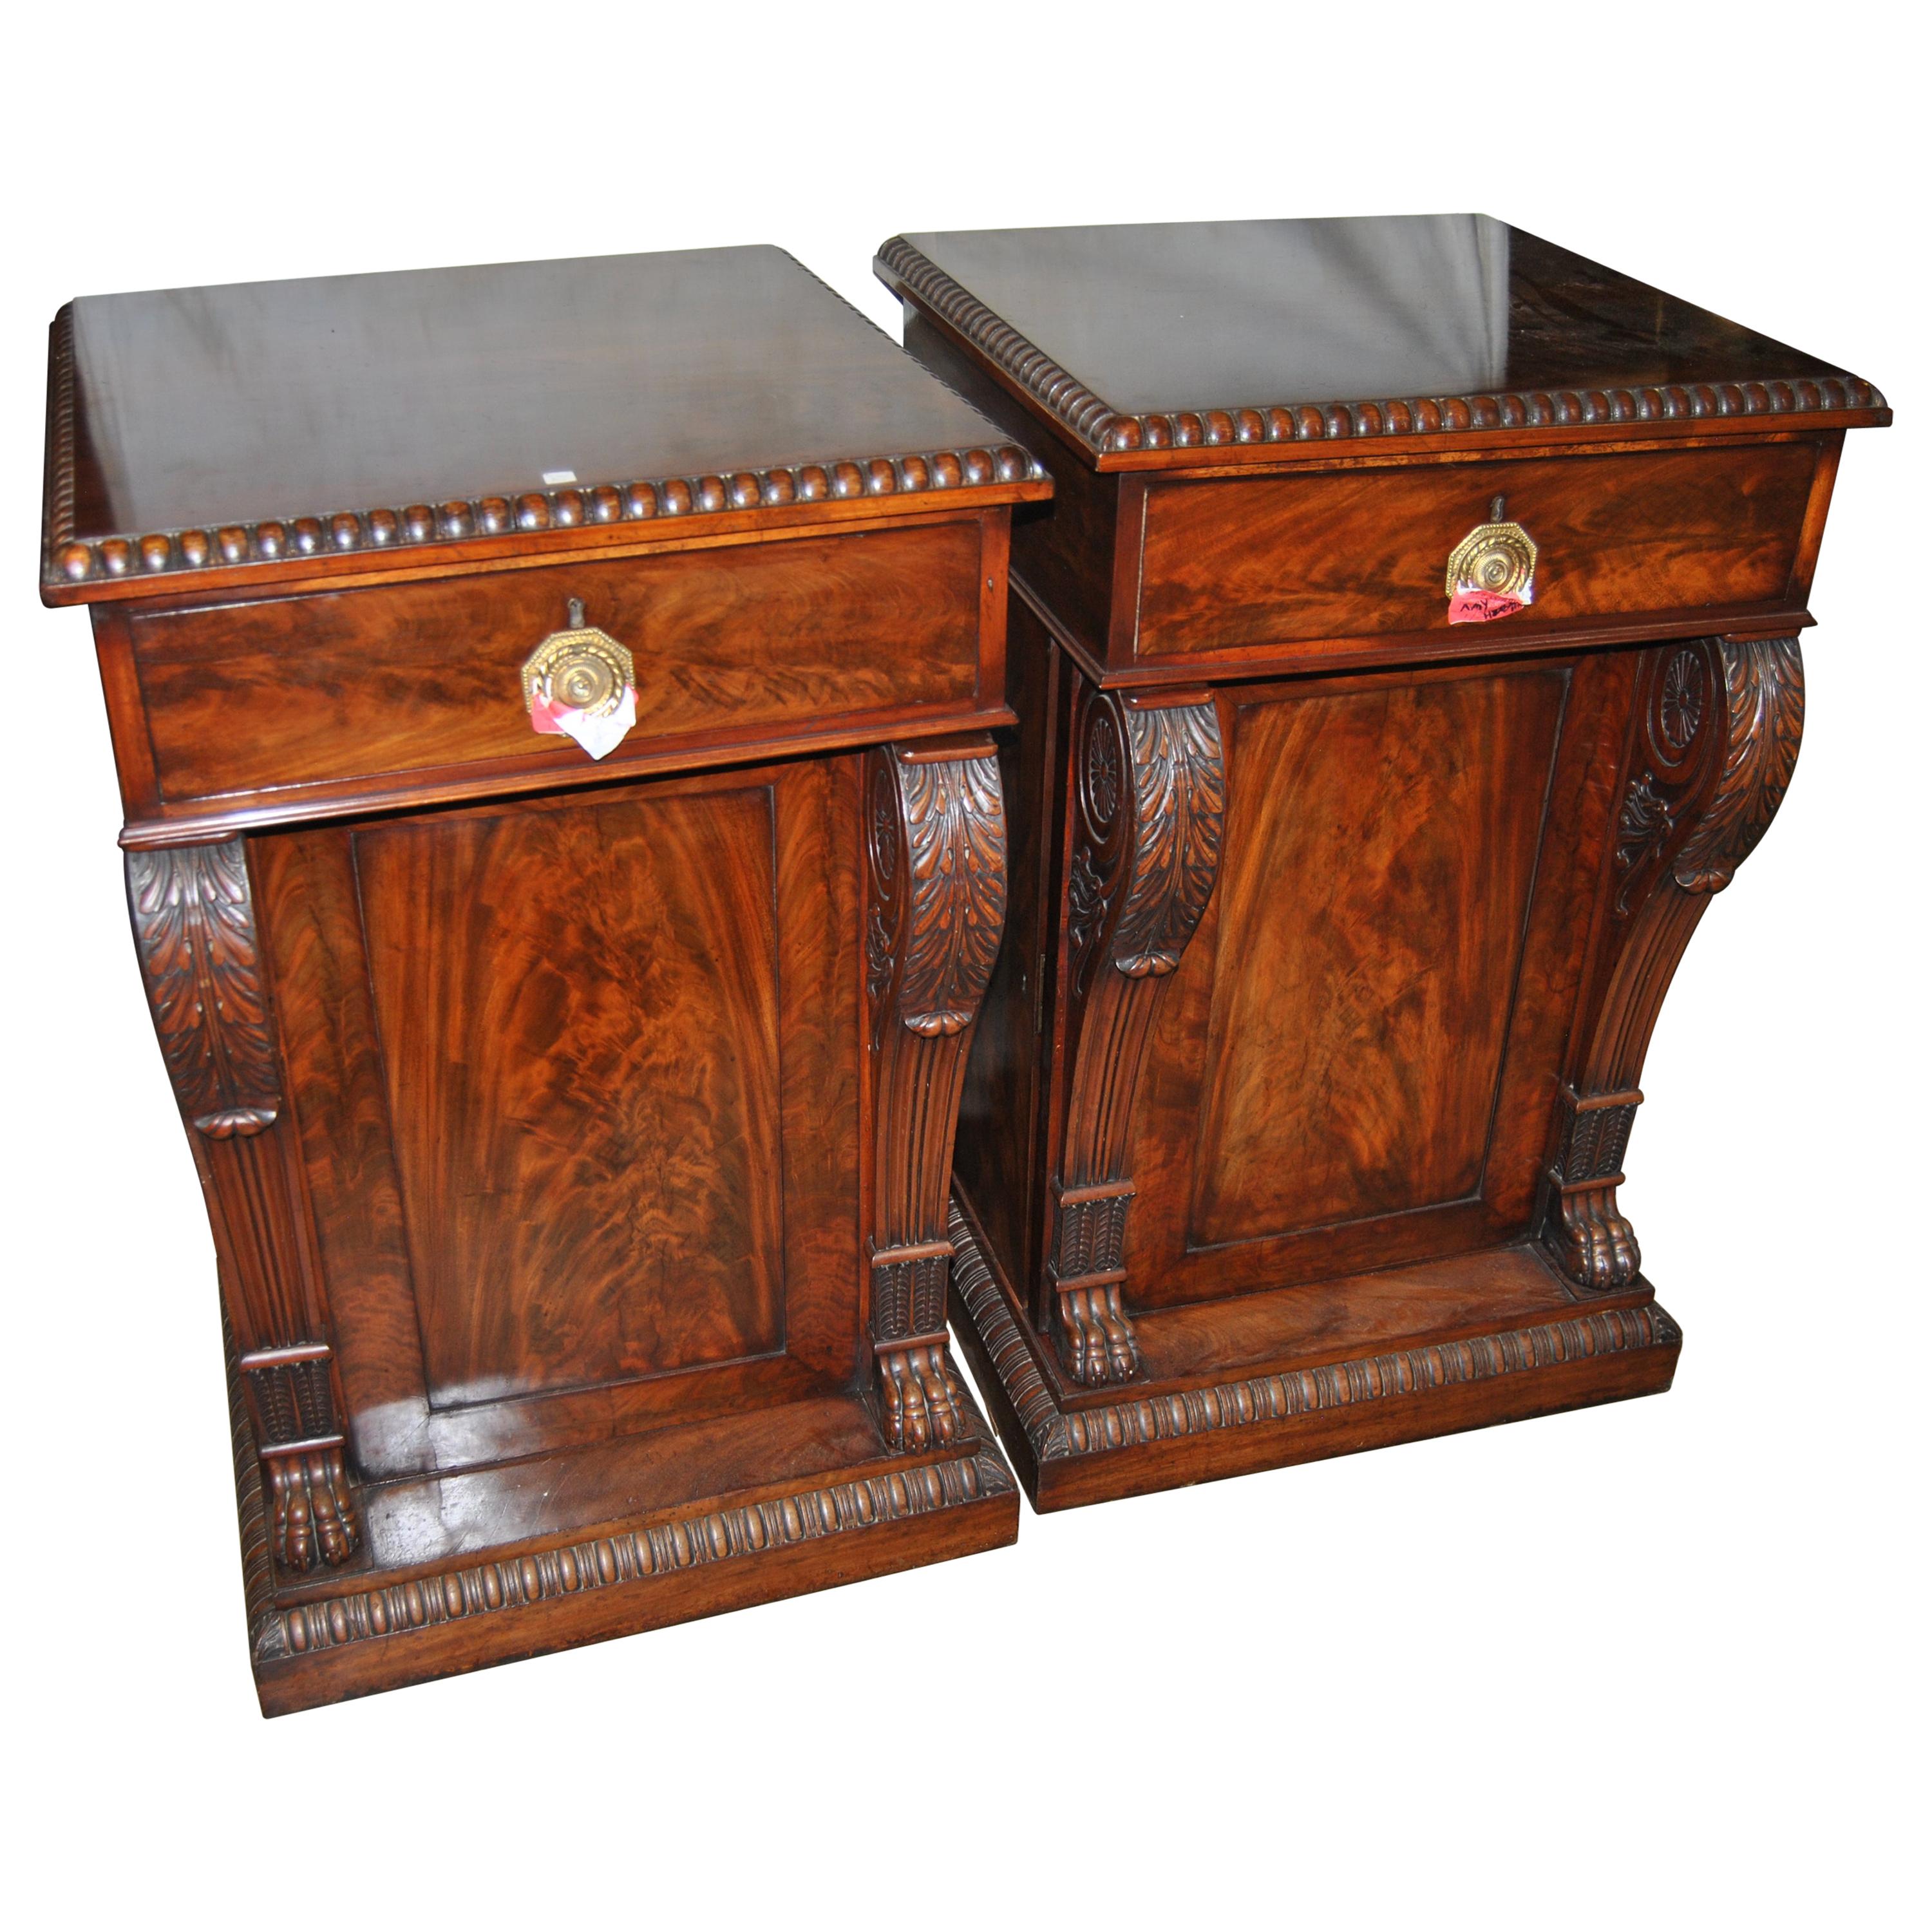 Matched Pair of English 19th Century Mahogany Pedestals / Stands / Cabinets